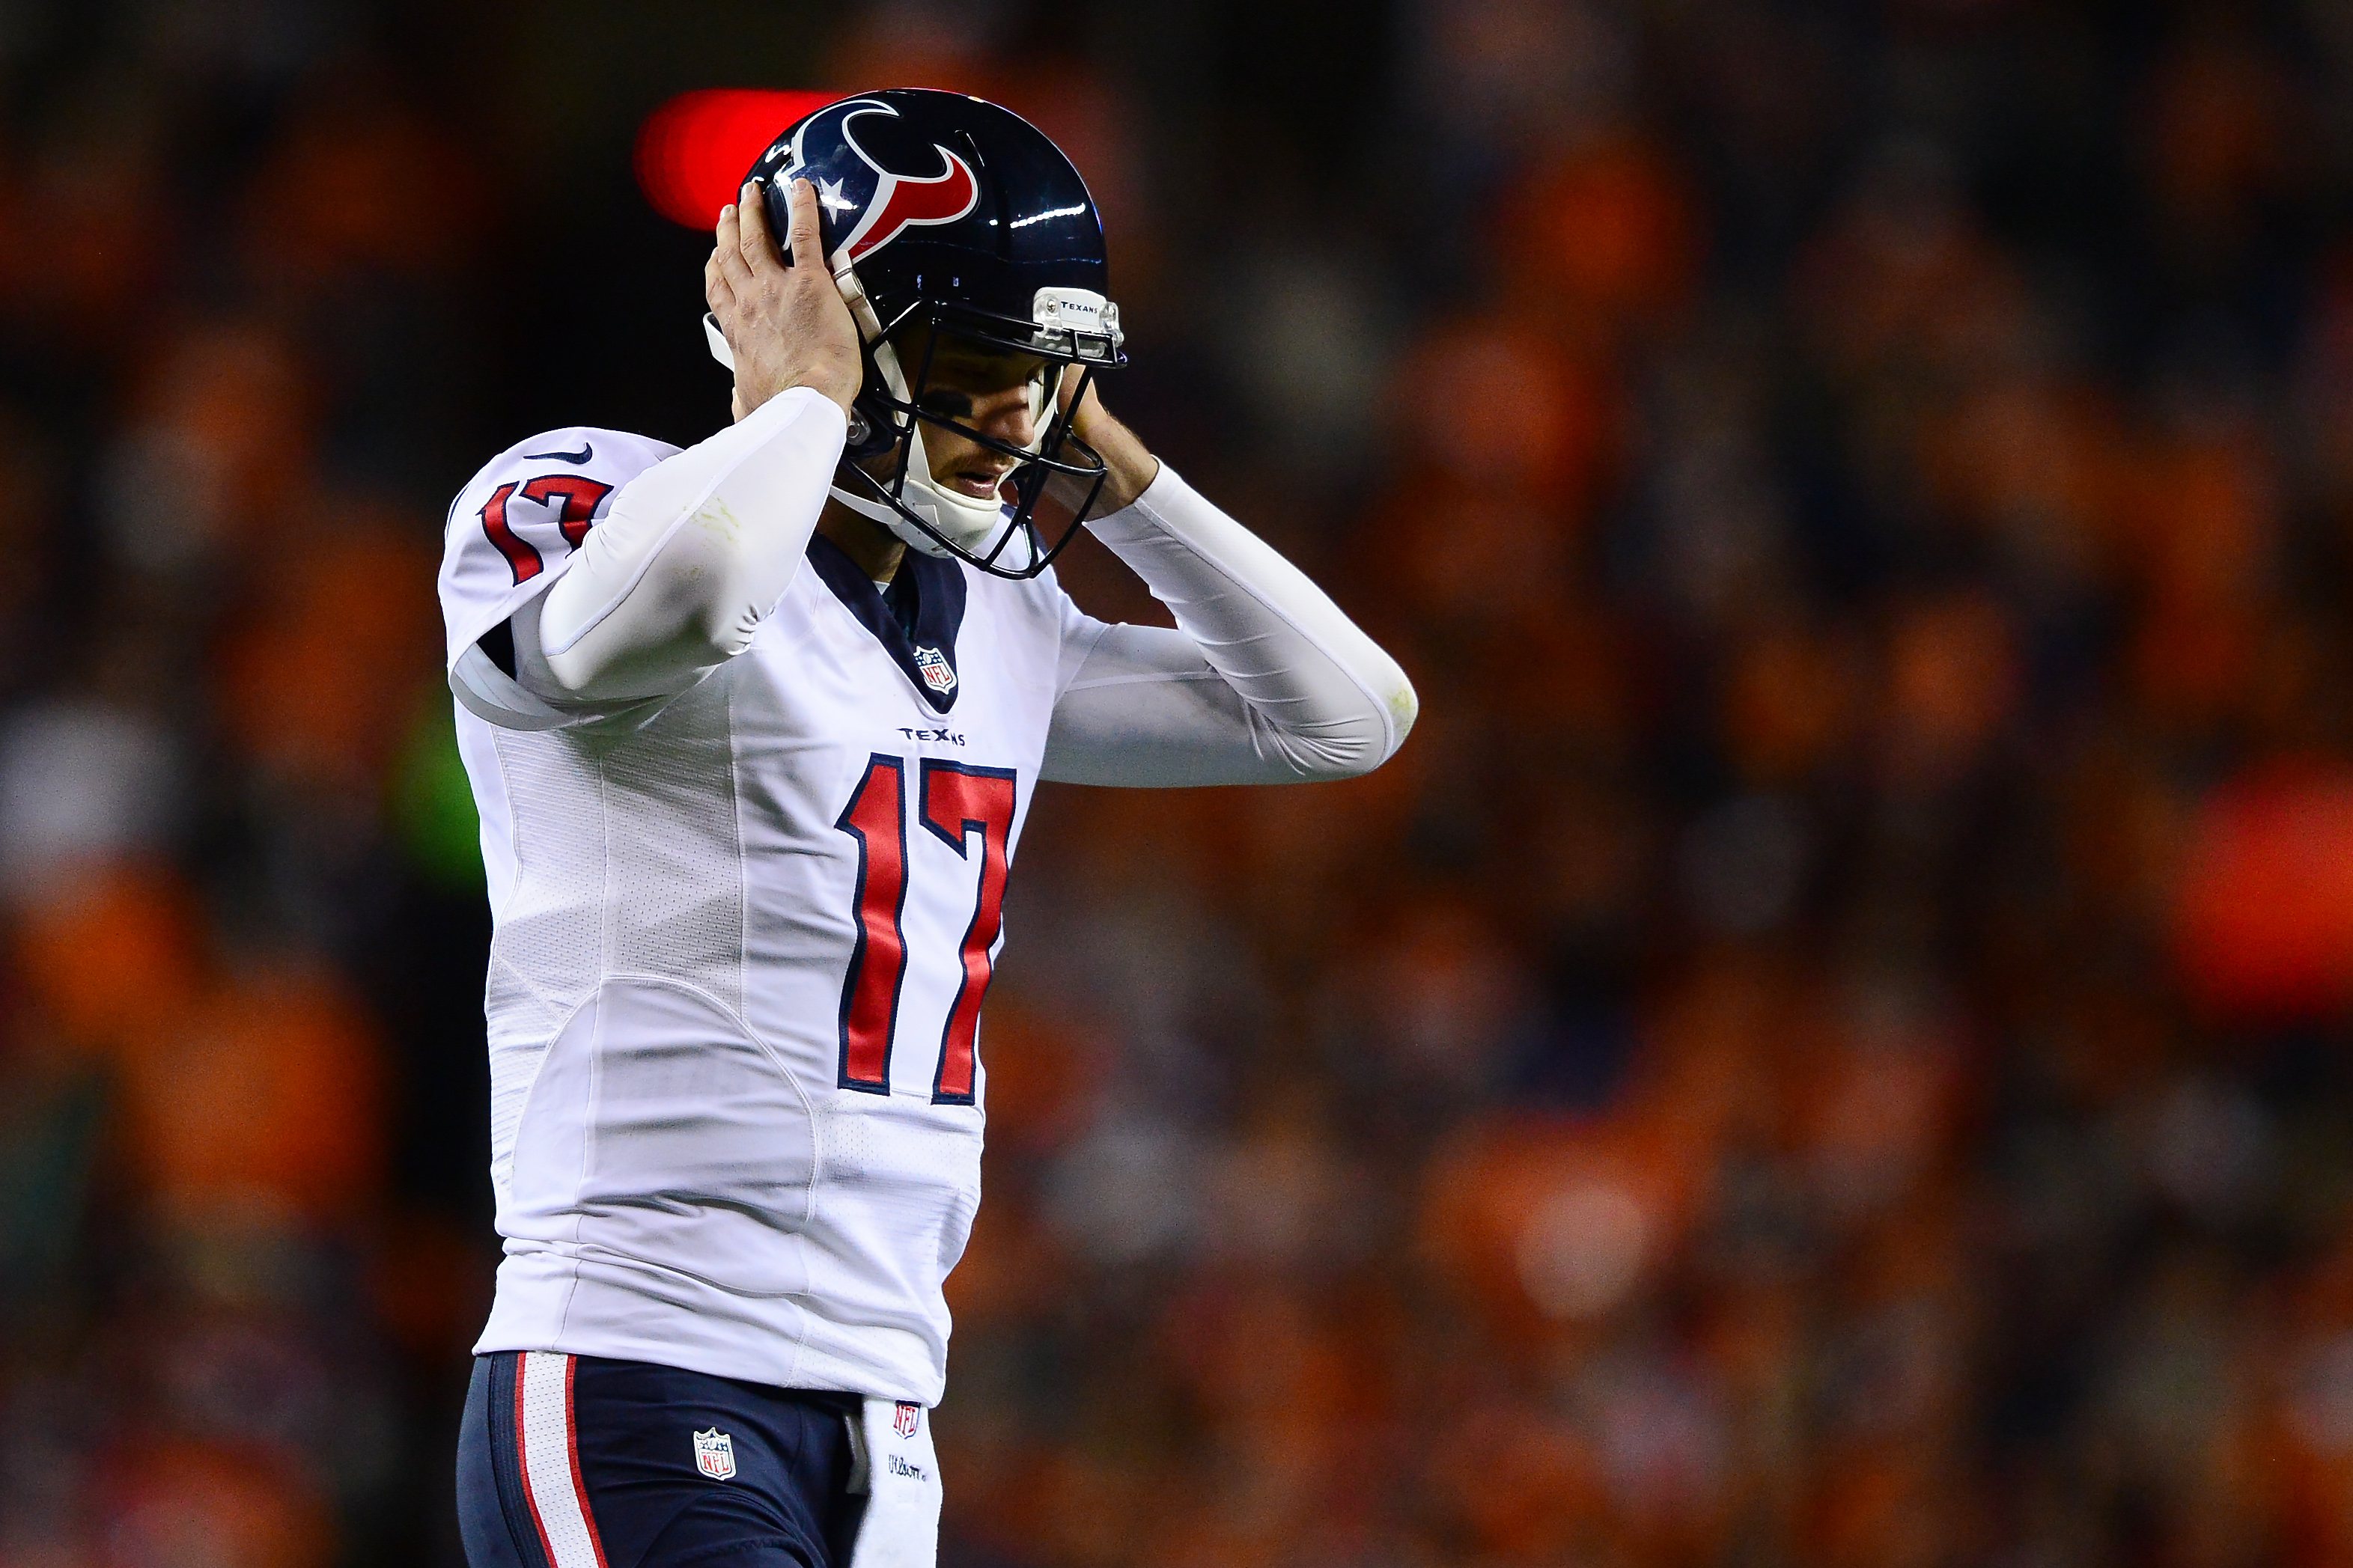 Quarterback Brock Osweiler of the Houston Texans gets frustrated during a game | Dustin Bradford/Getty Images